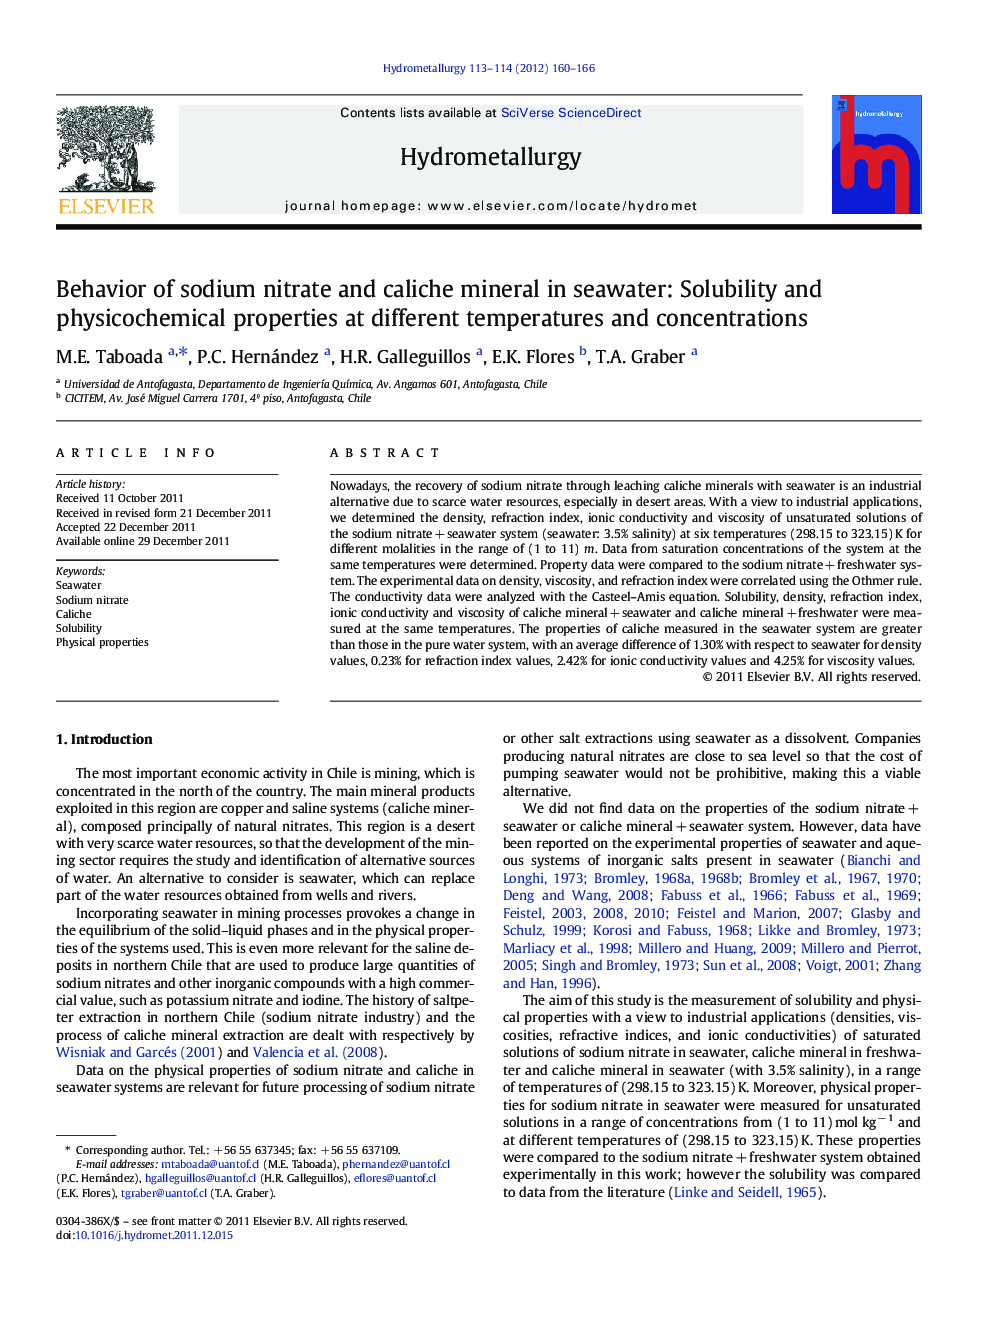 Behavior of sodium nitrate and caliche mineral in seawater: Solubility and physicochemical properties at different temperatures and concentrations